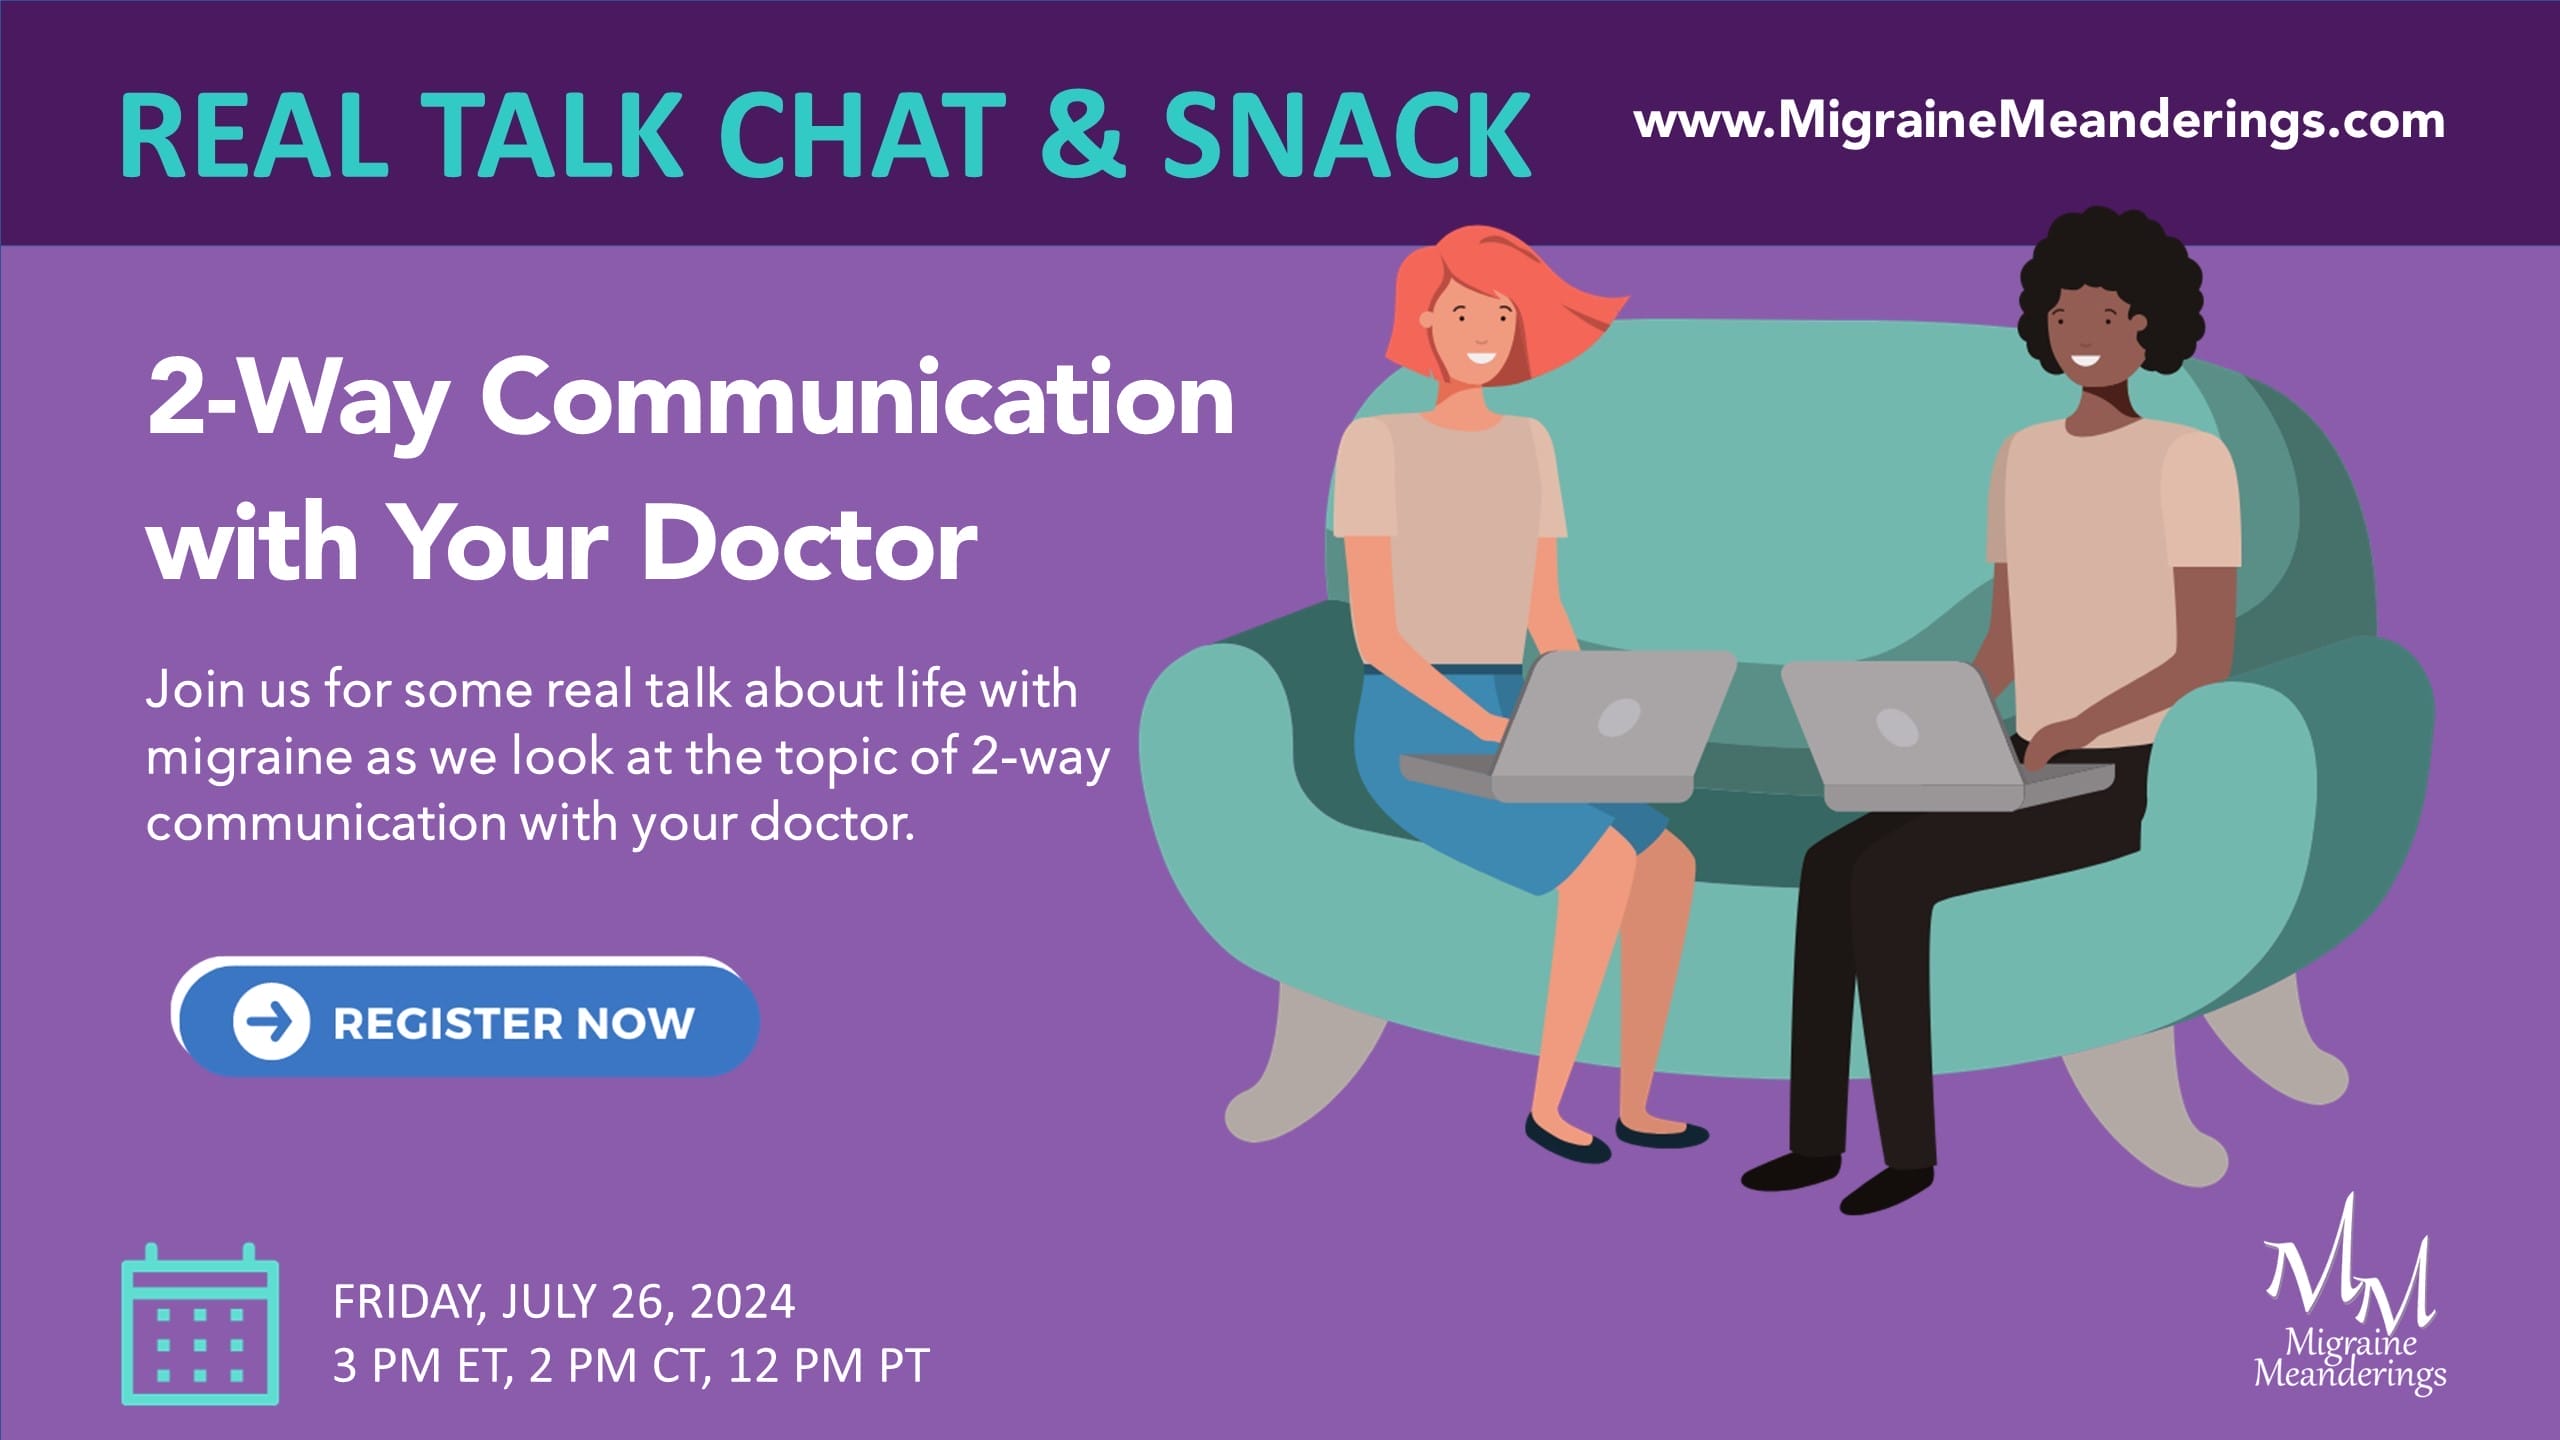 Chat & Snack - Communication with Dr